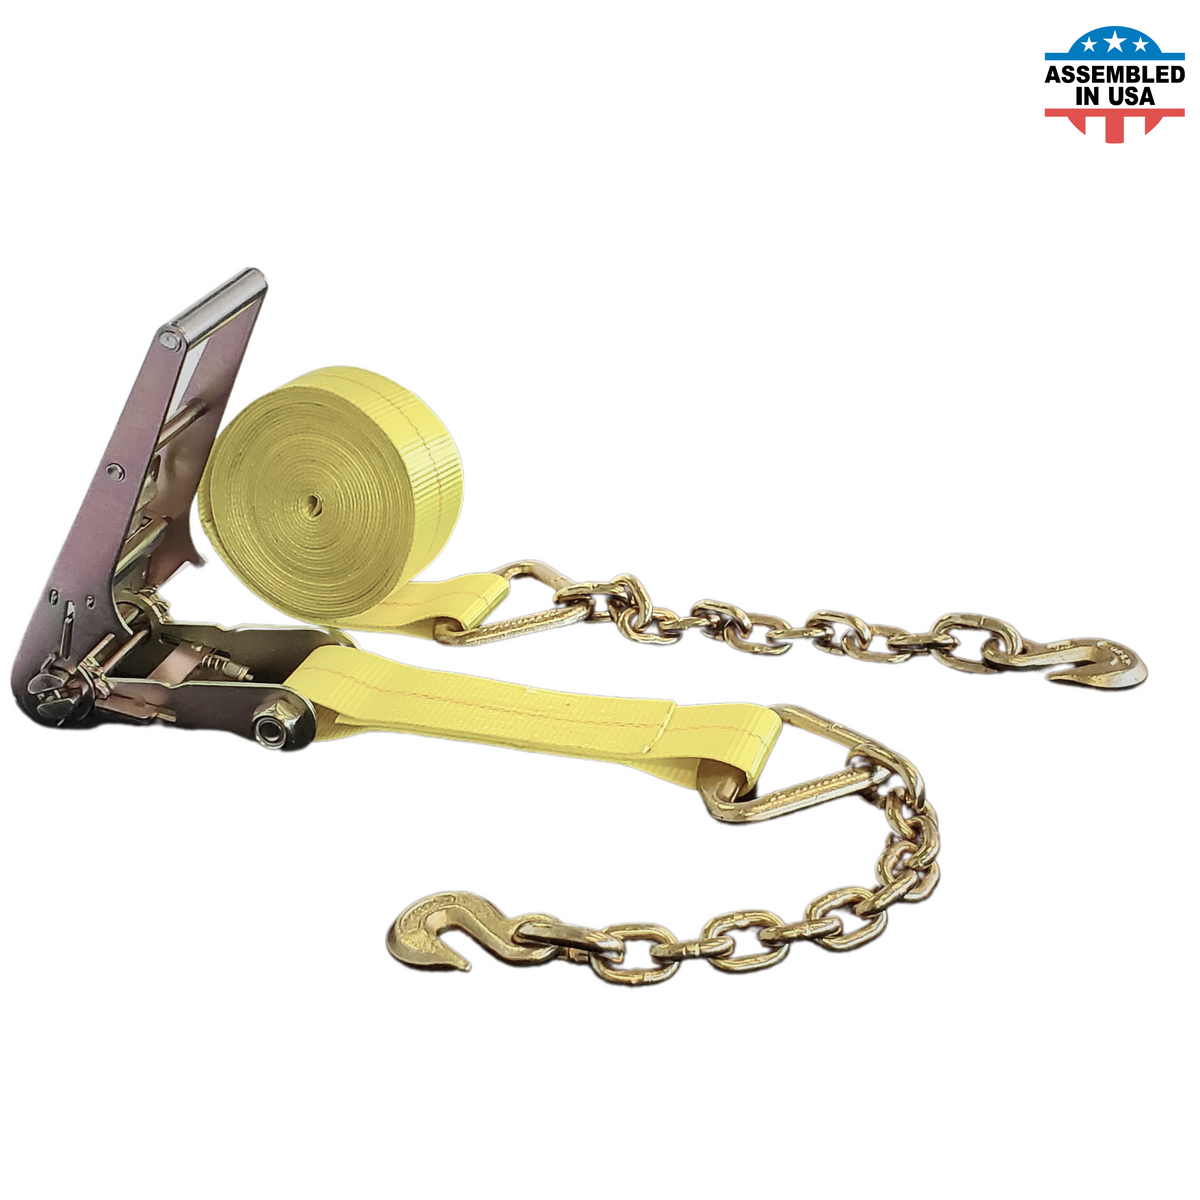 4" Ratchet Tie Down Strap w/ Chain Extensions